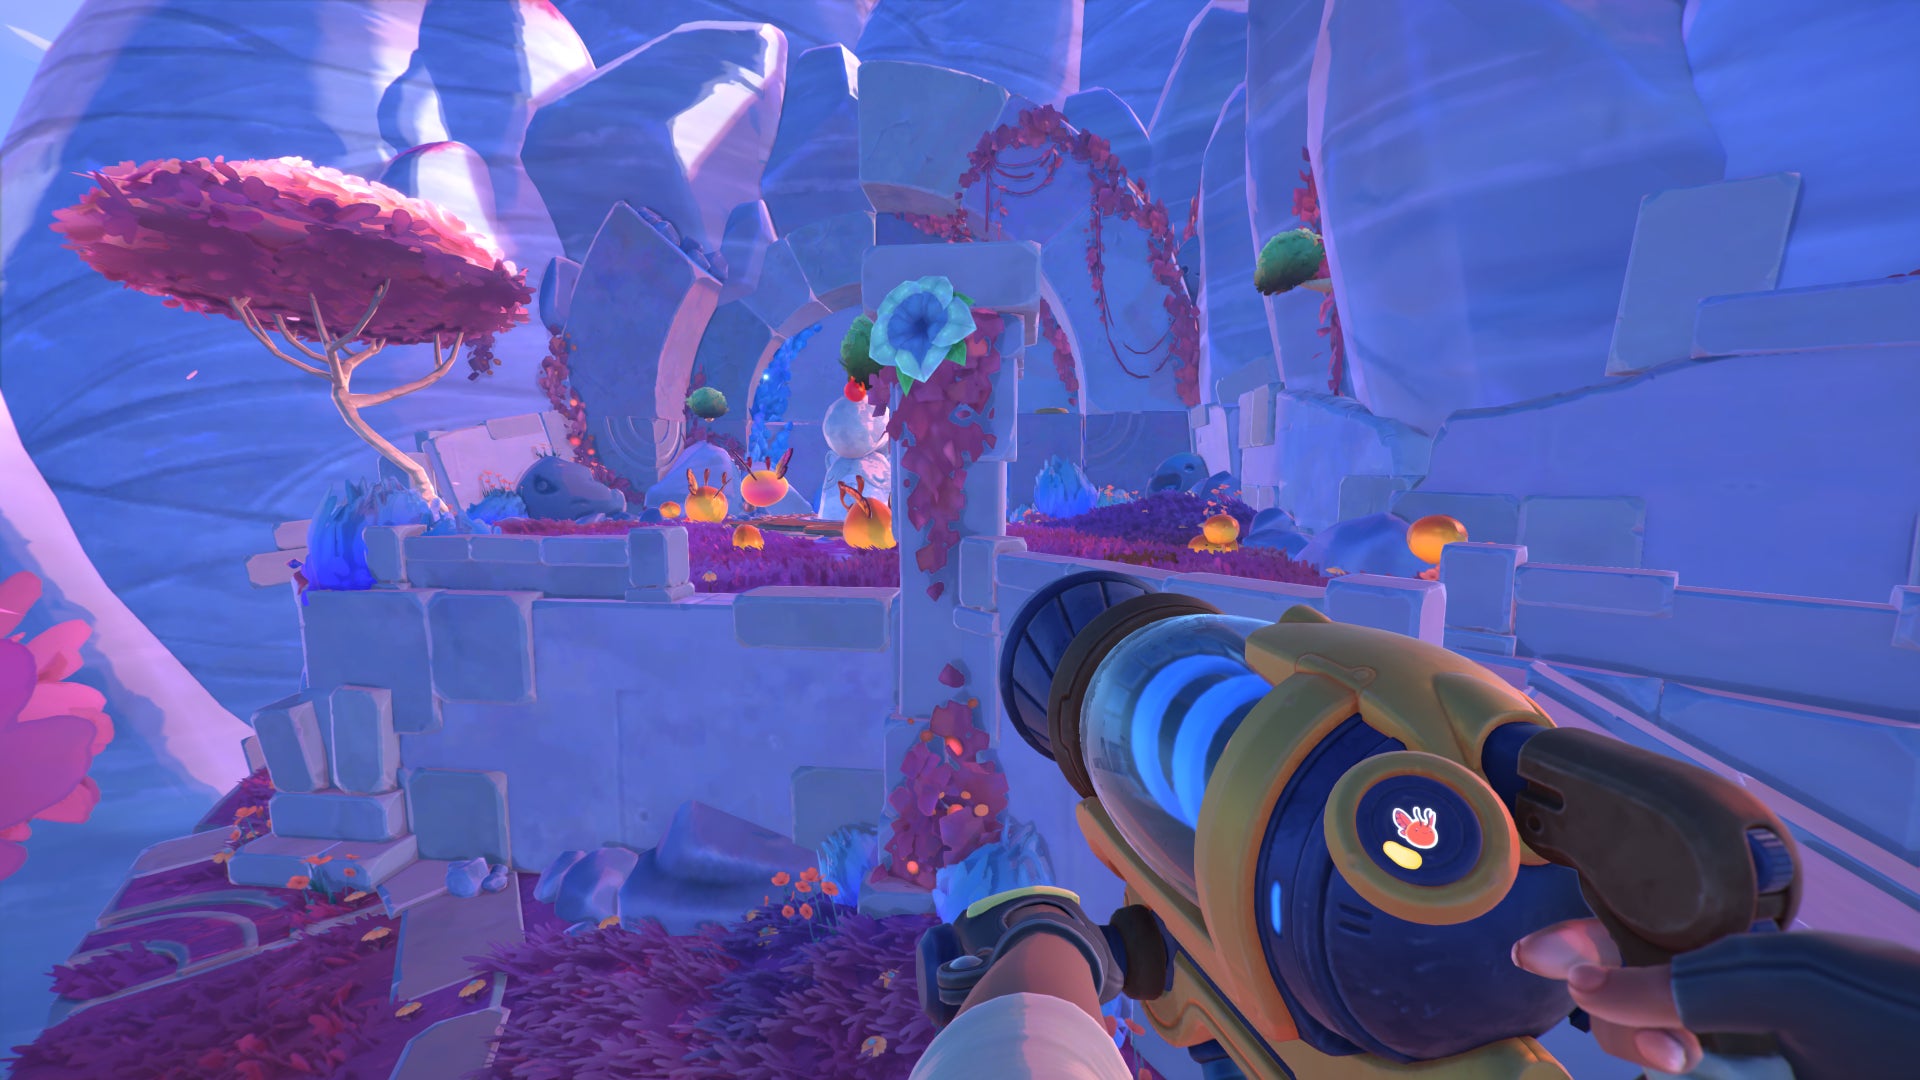 A player in Starlight Strand looks over at a Moondew Flower and various Flutter Slimes in Slime Rancher 2